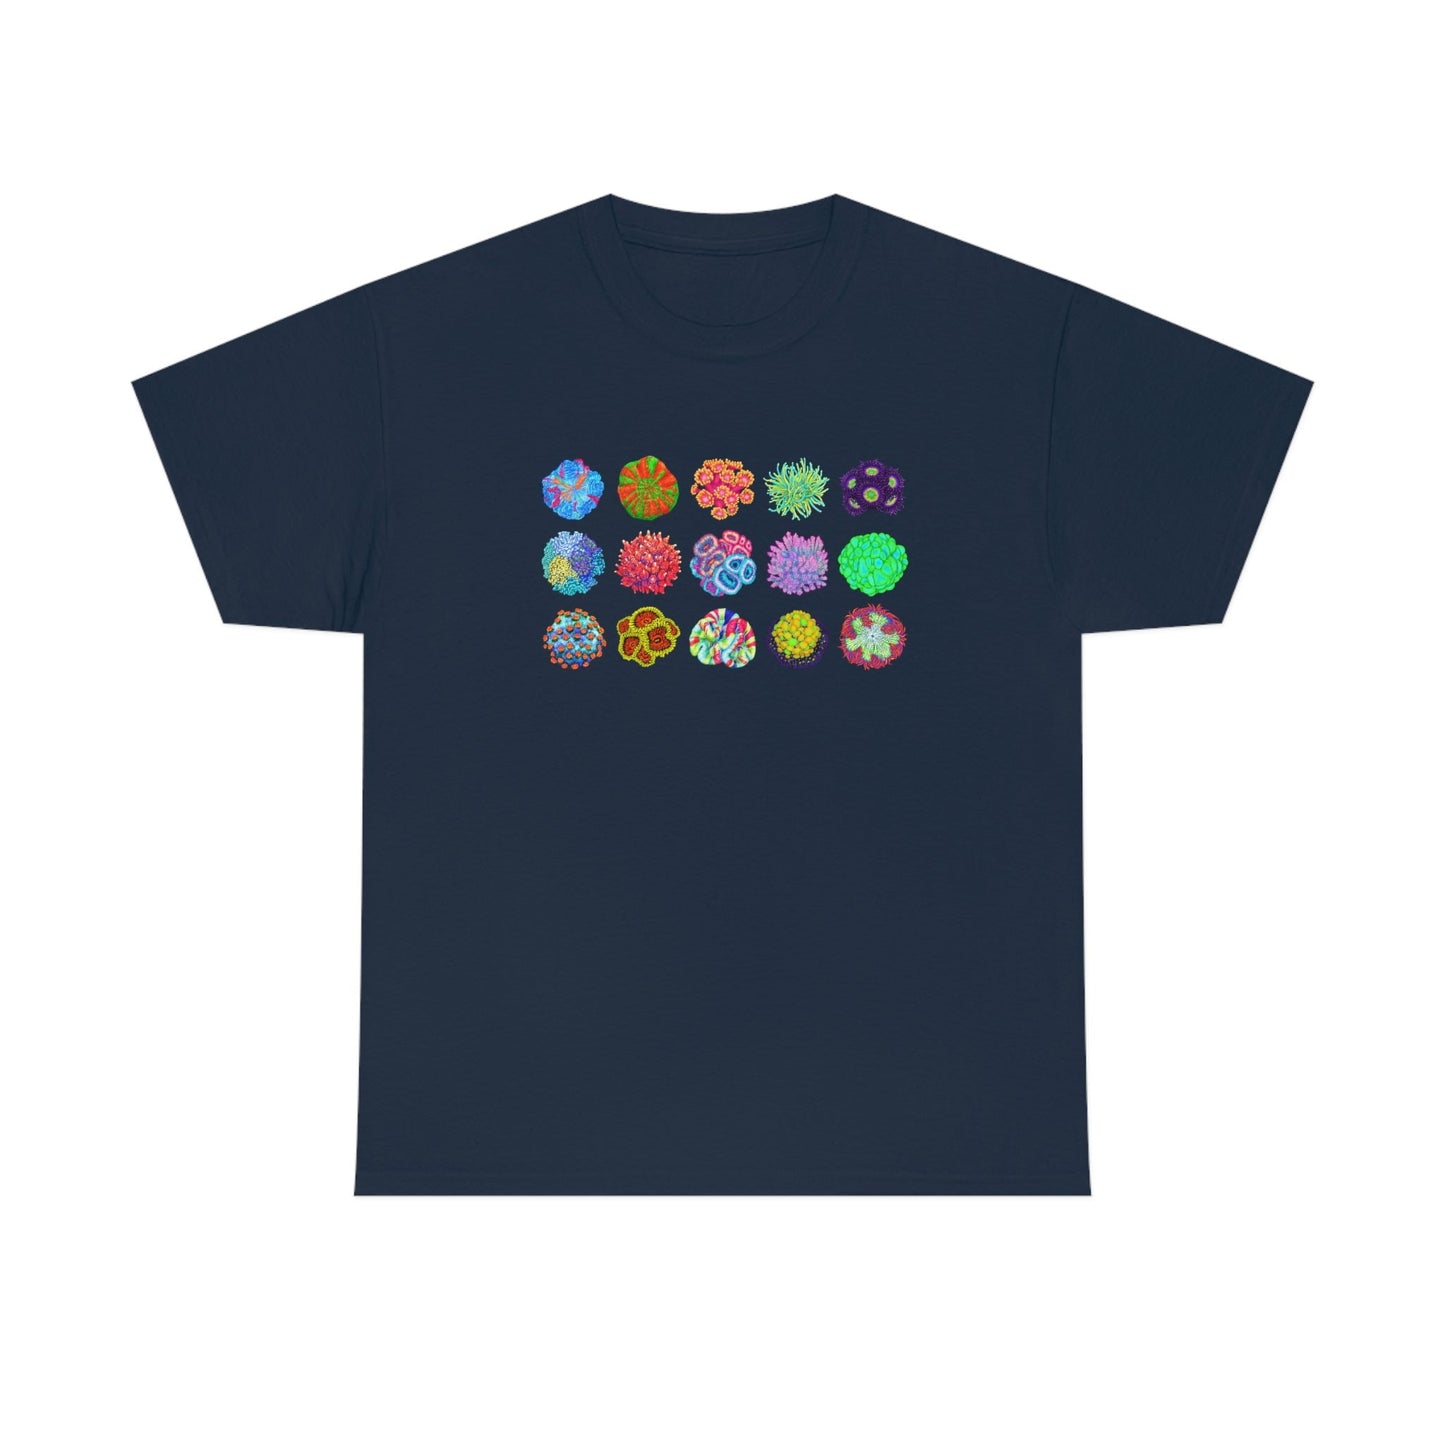 Shirt with 15 Corals on the Front - Reef of Clowns